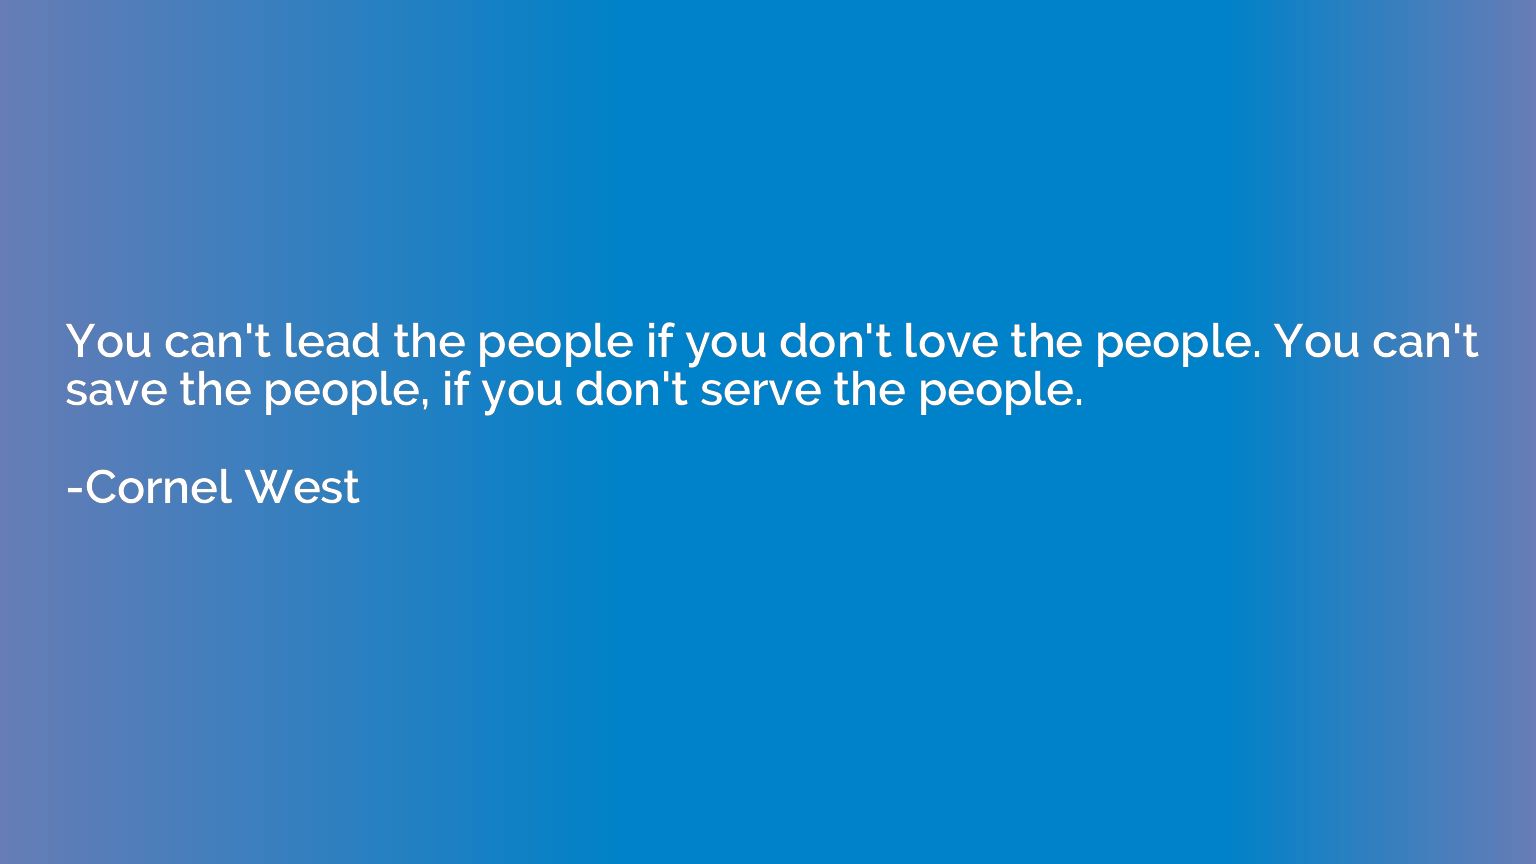 You can't lead the people if you don't love the people. You 